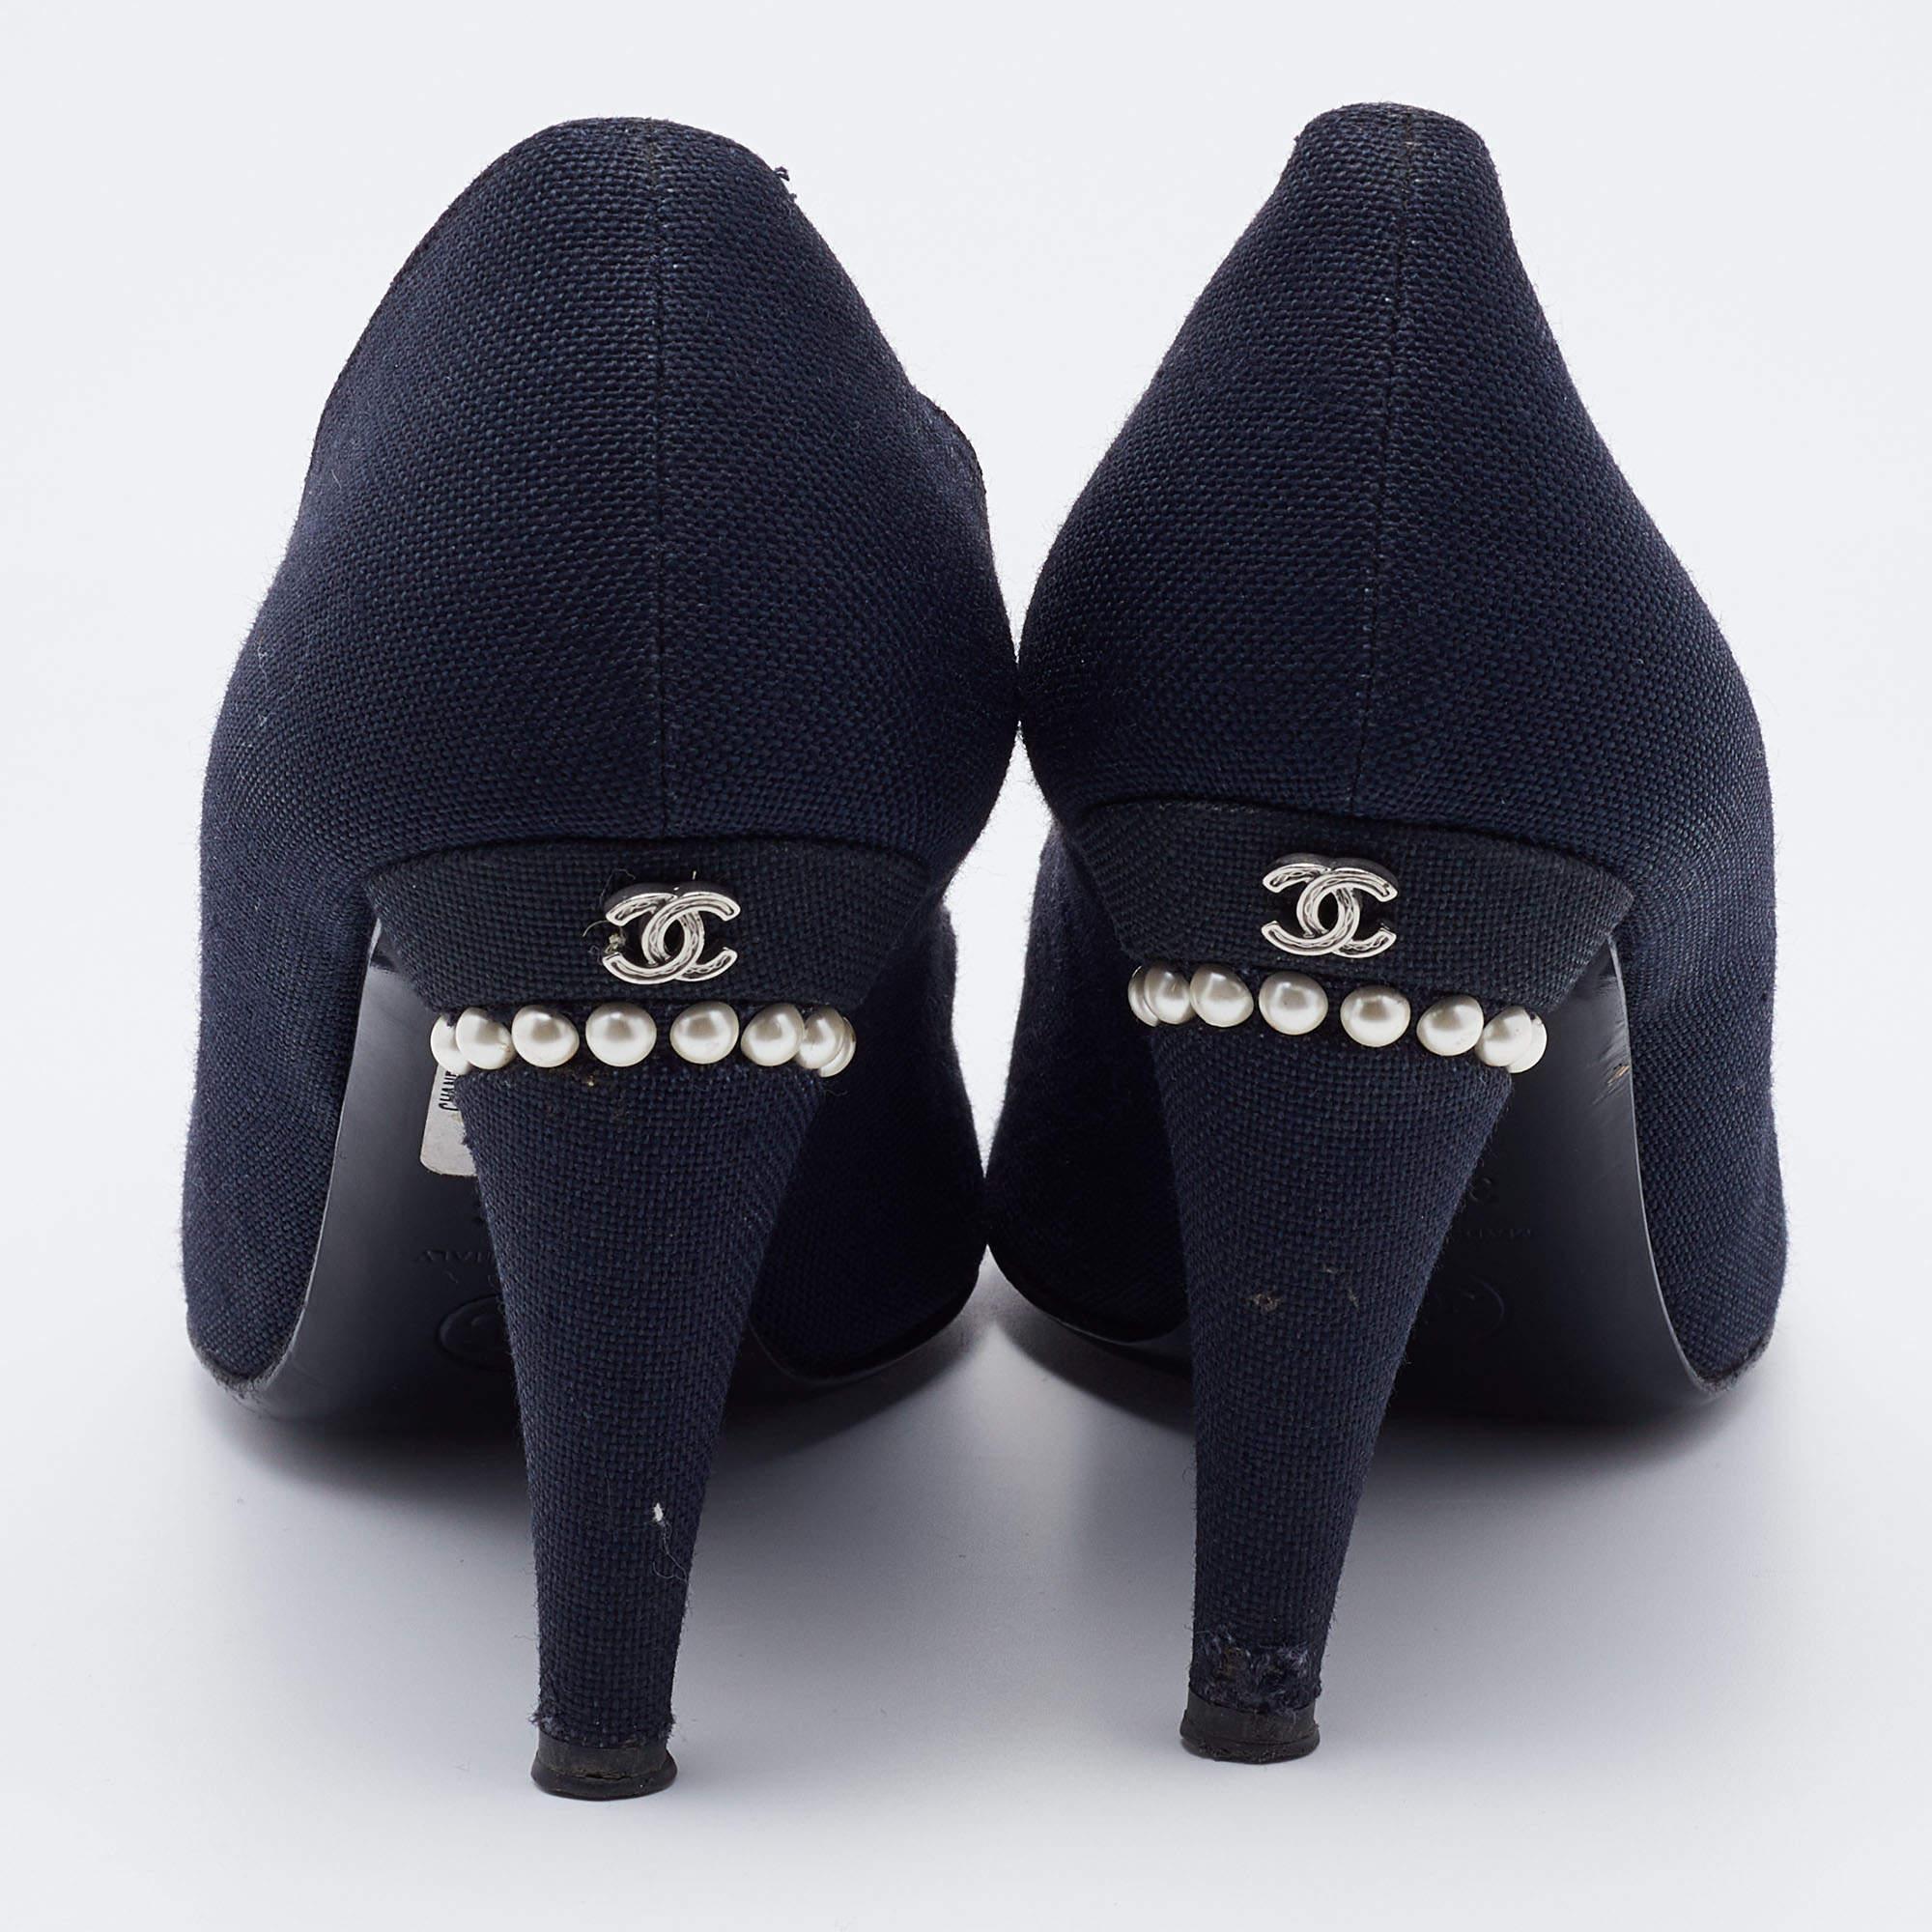 Chanel Navy Blue Canvas Embellished Pointed Toe Pumps Size 39.5 2